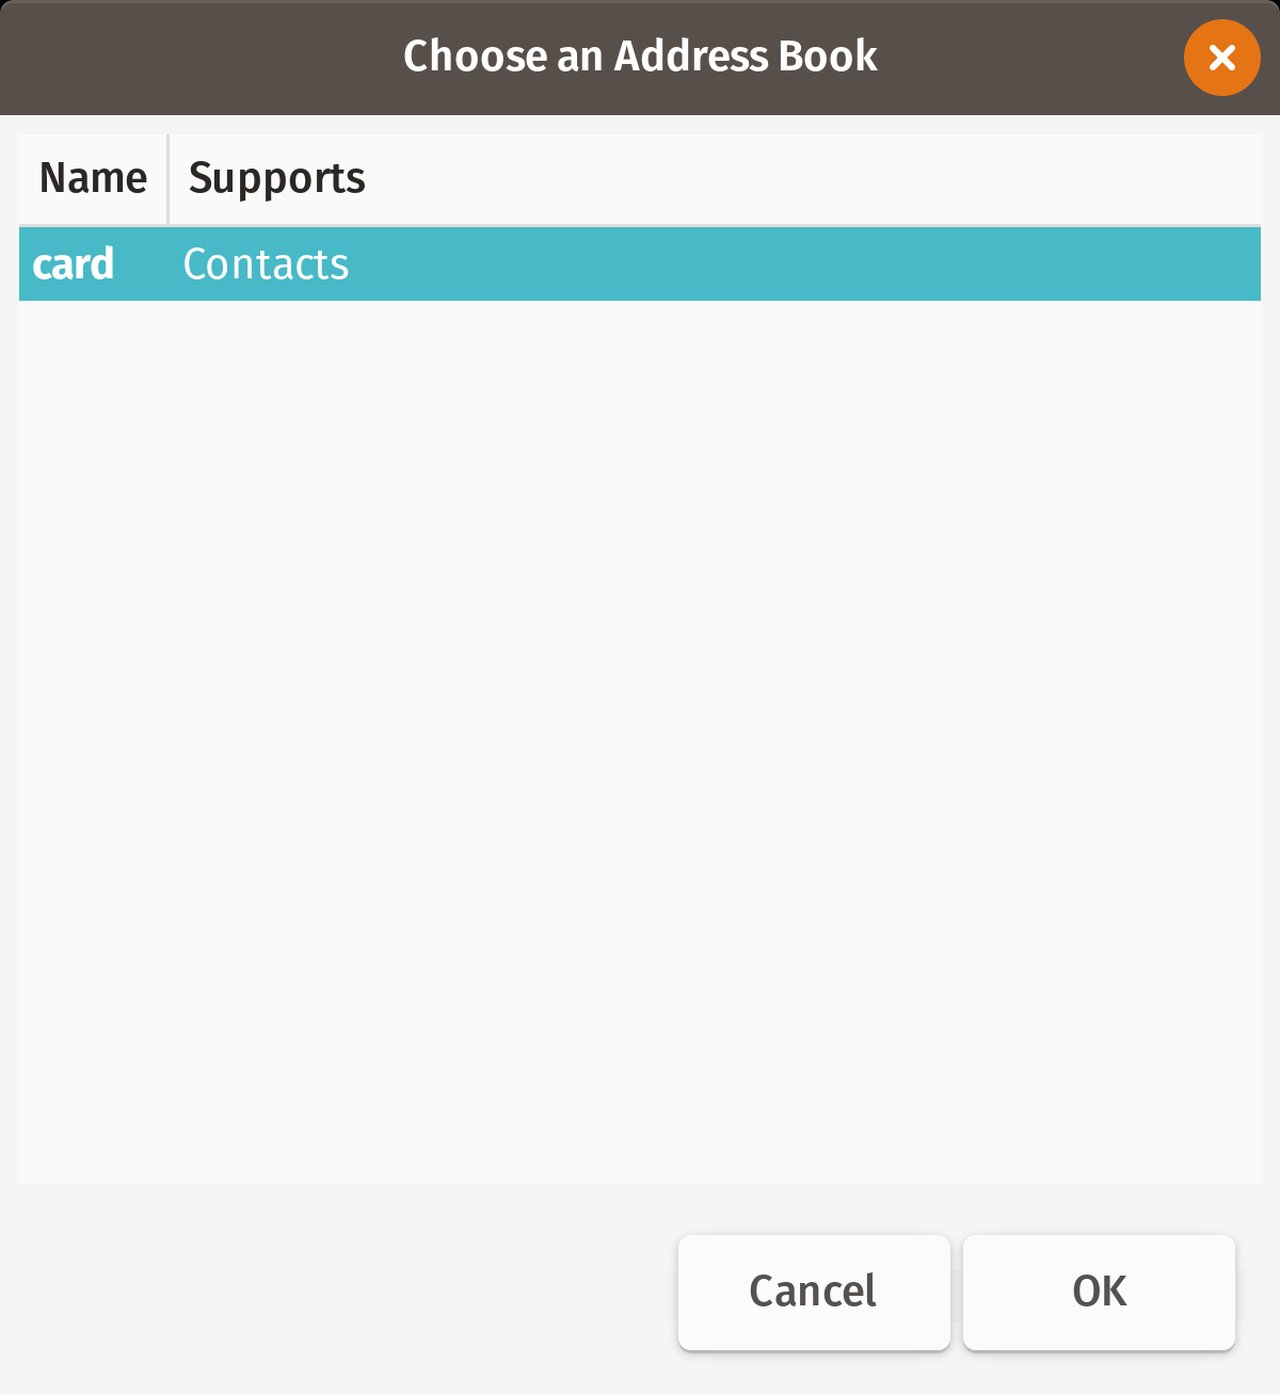 Screenshot of the Choose an Address Book window. There is only one address book shown in the table and it is selected: Name: card, Supports: Contacts. At the bottom of the dialog are two buttons: Cancel and OK.